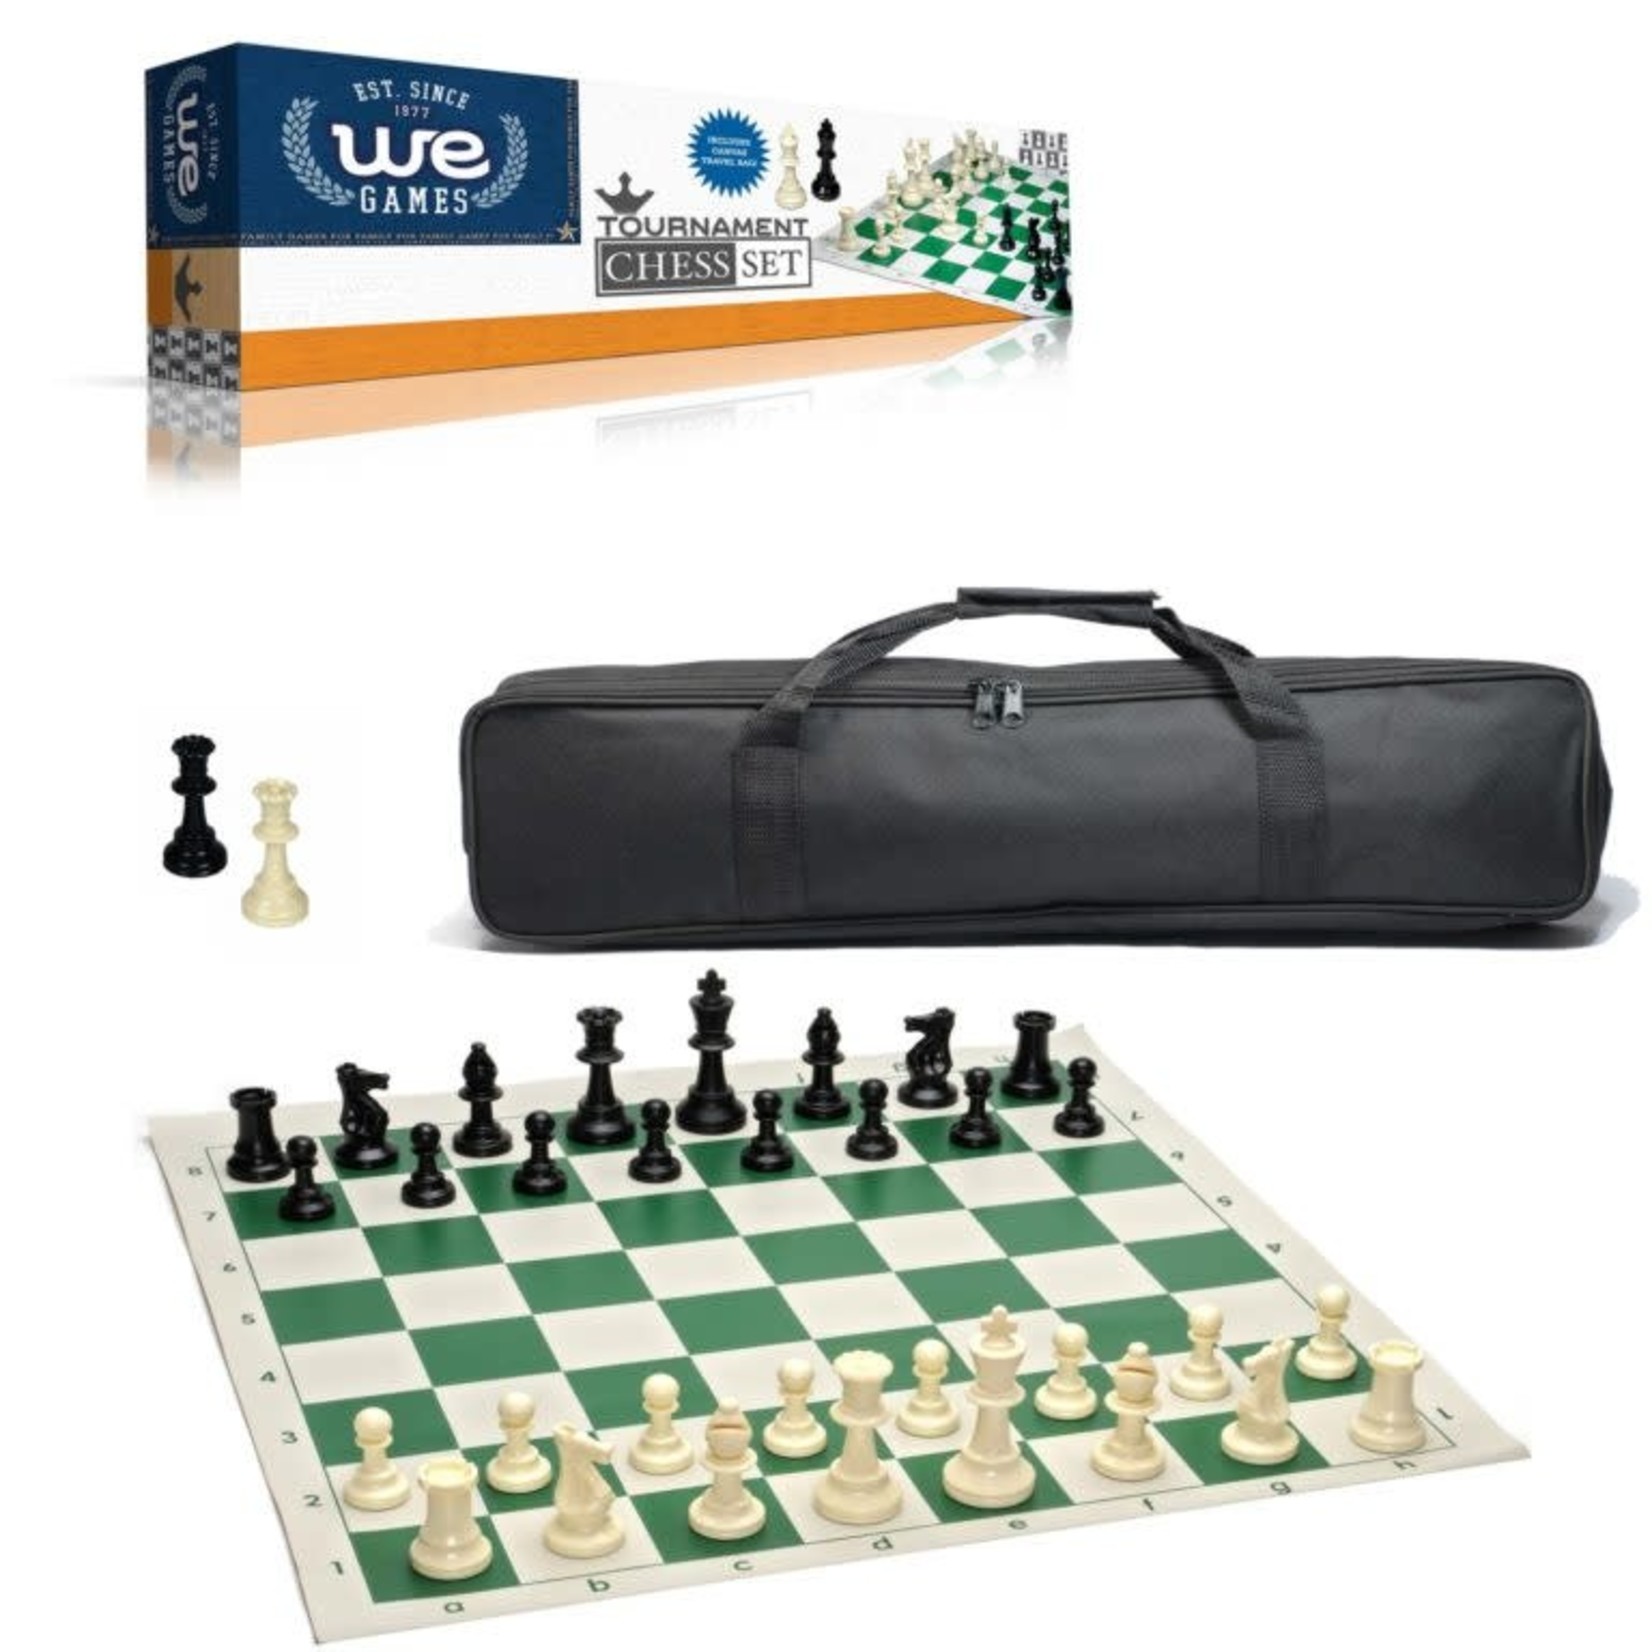 Wood Expressions Tournament Chess Set with Black Canvas Bag